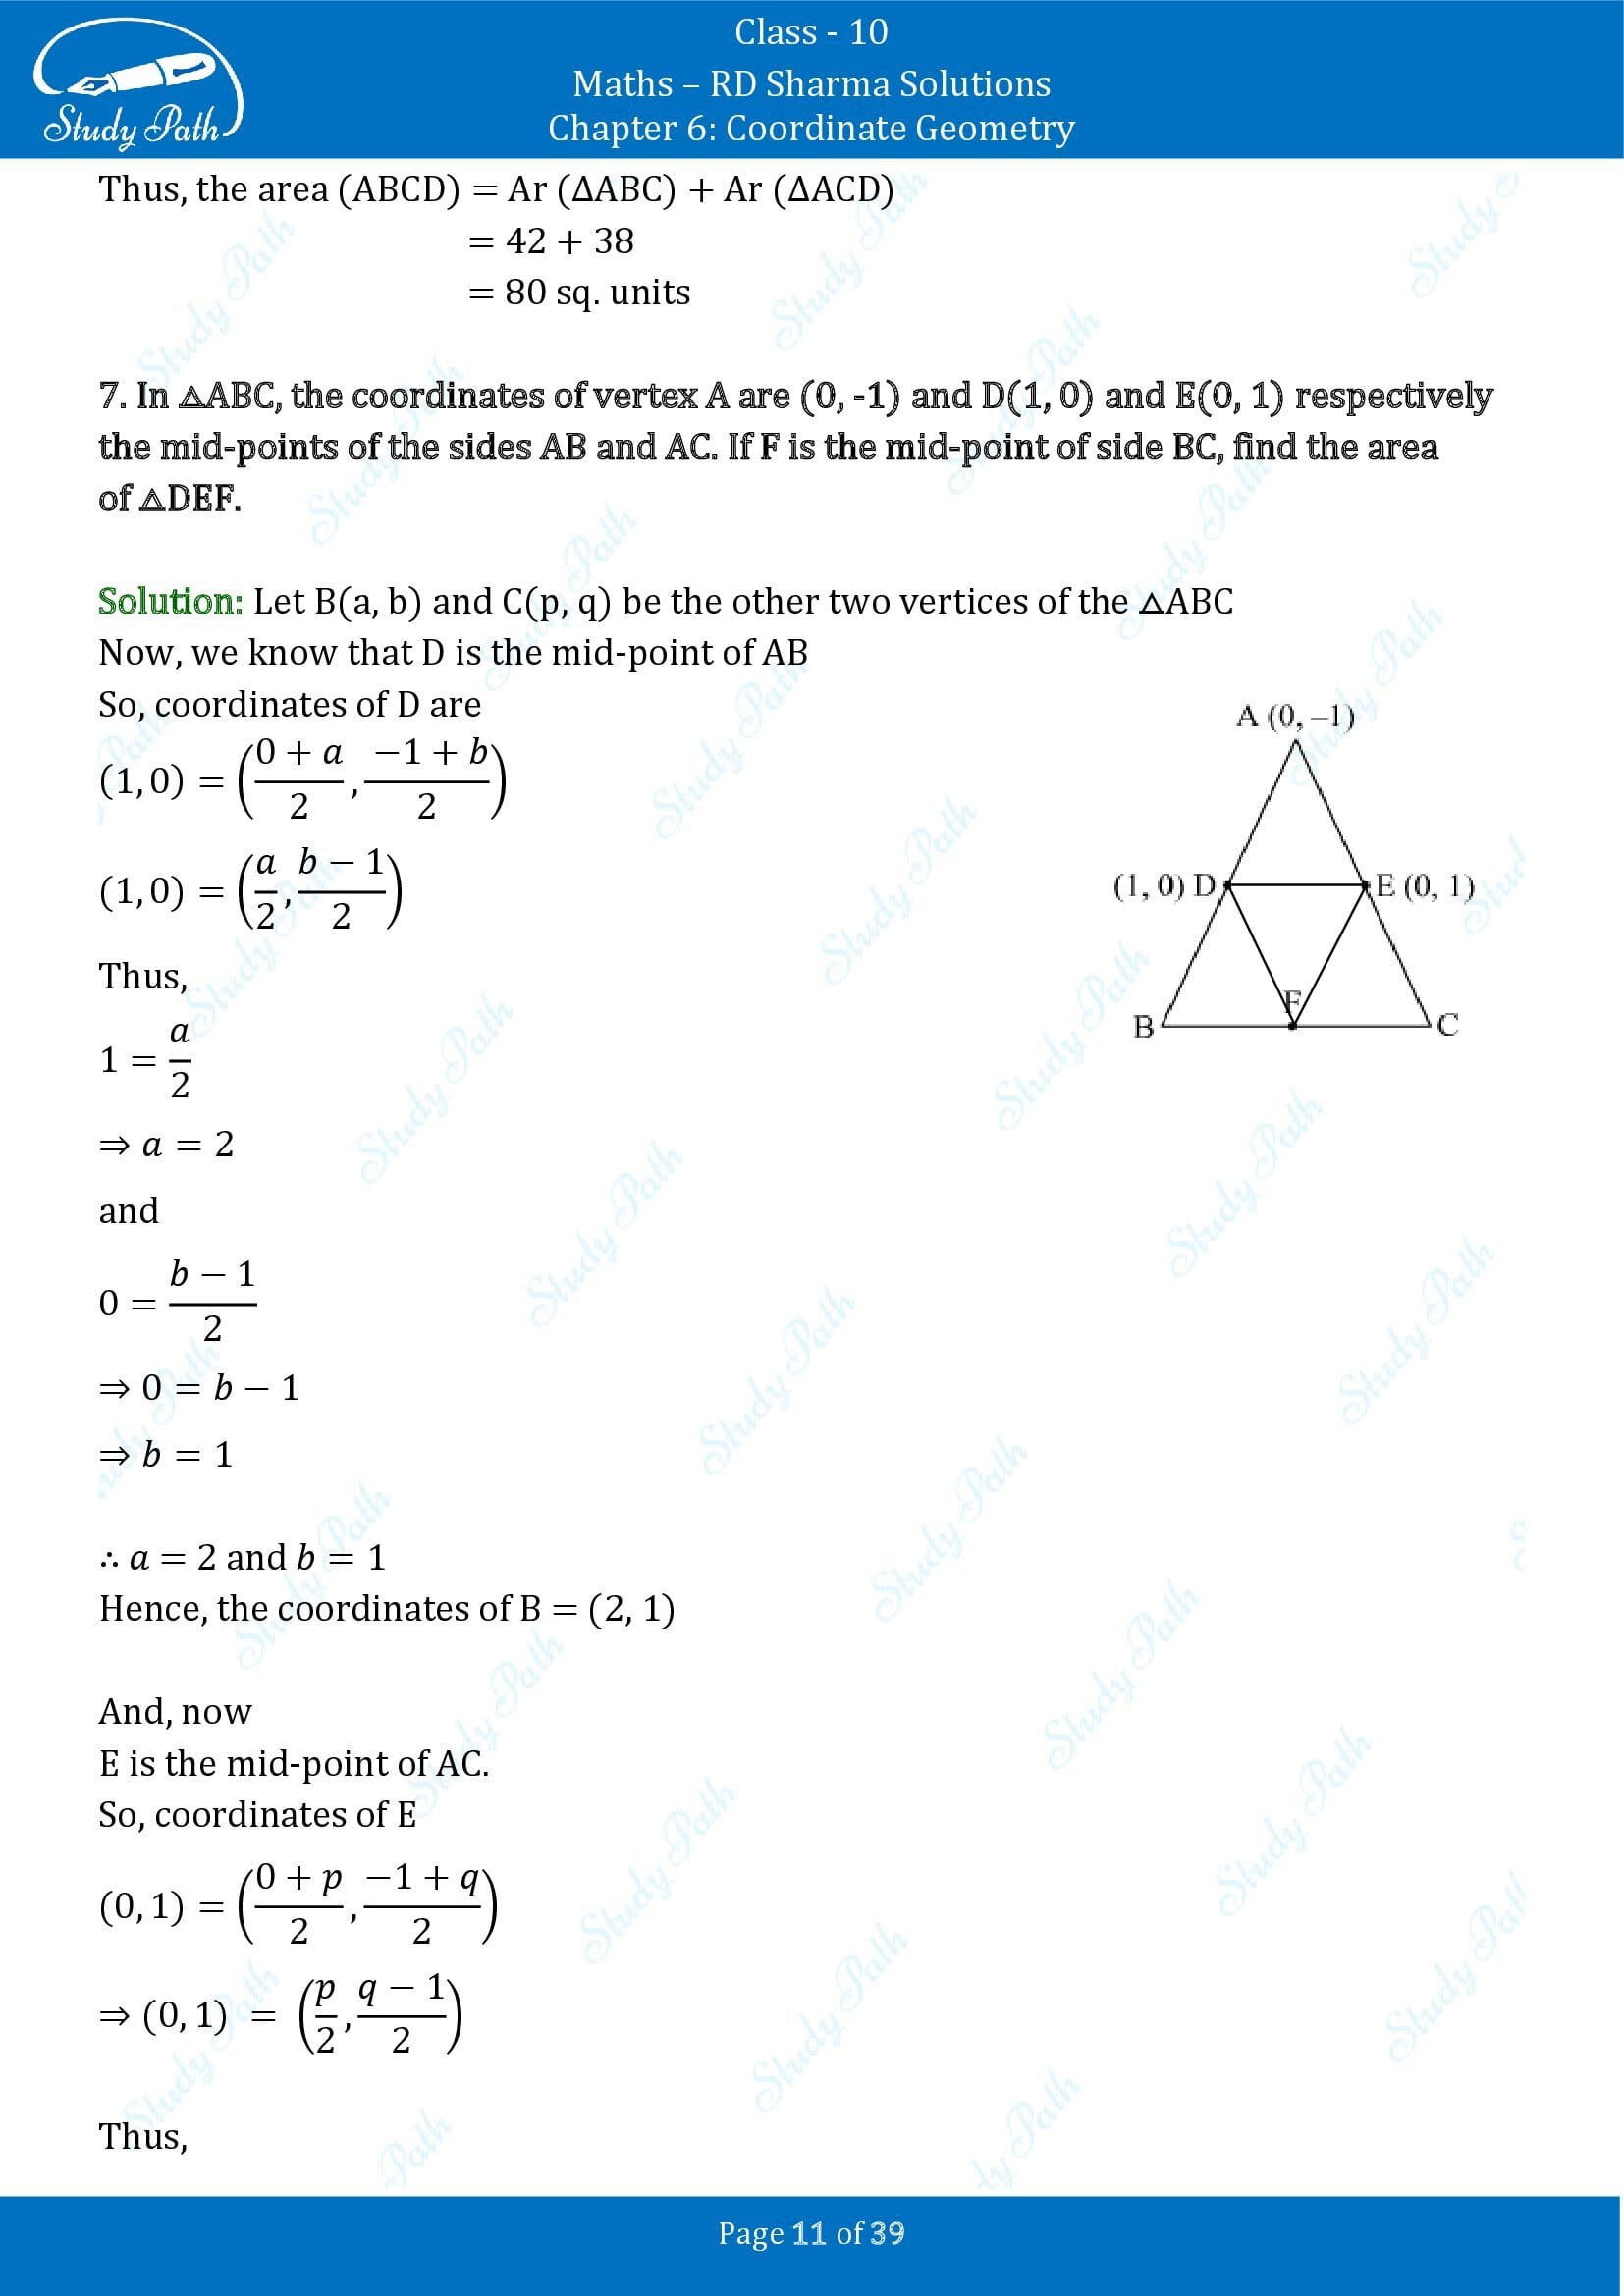 RD Sharma Solutions Class 10 Chapter 6 Coordinate Geometry Exercise 6.5 0011